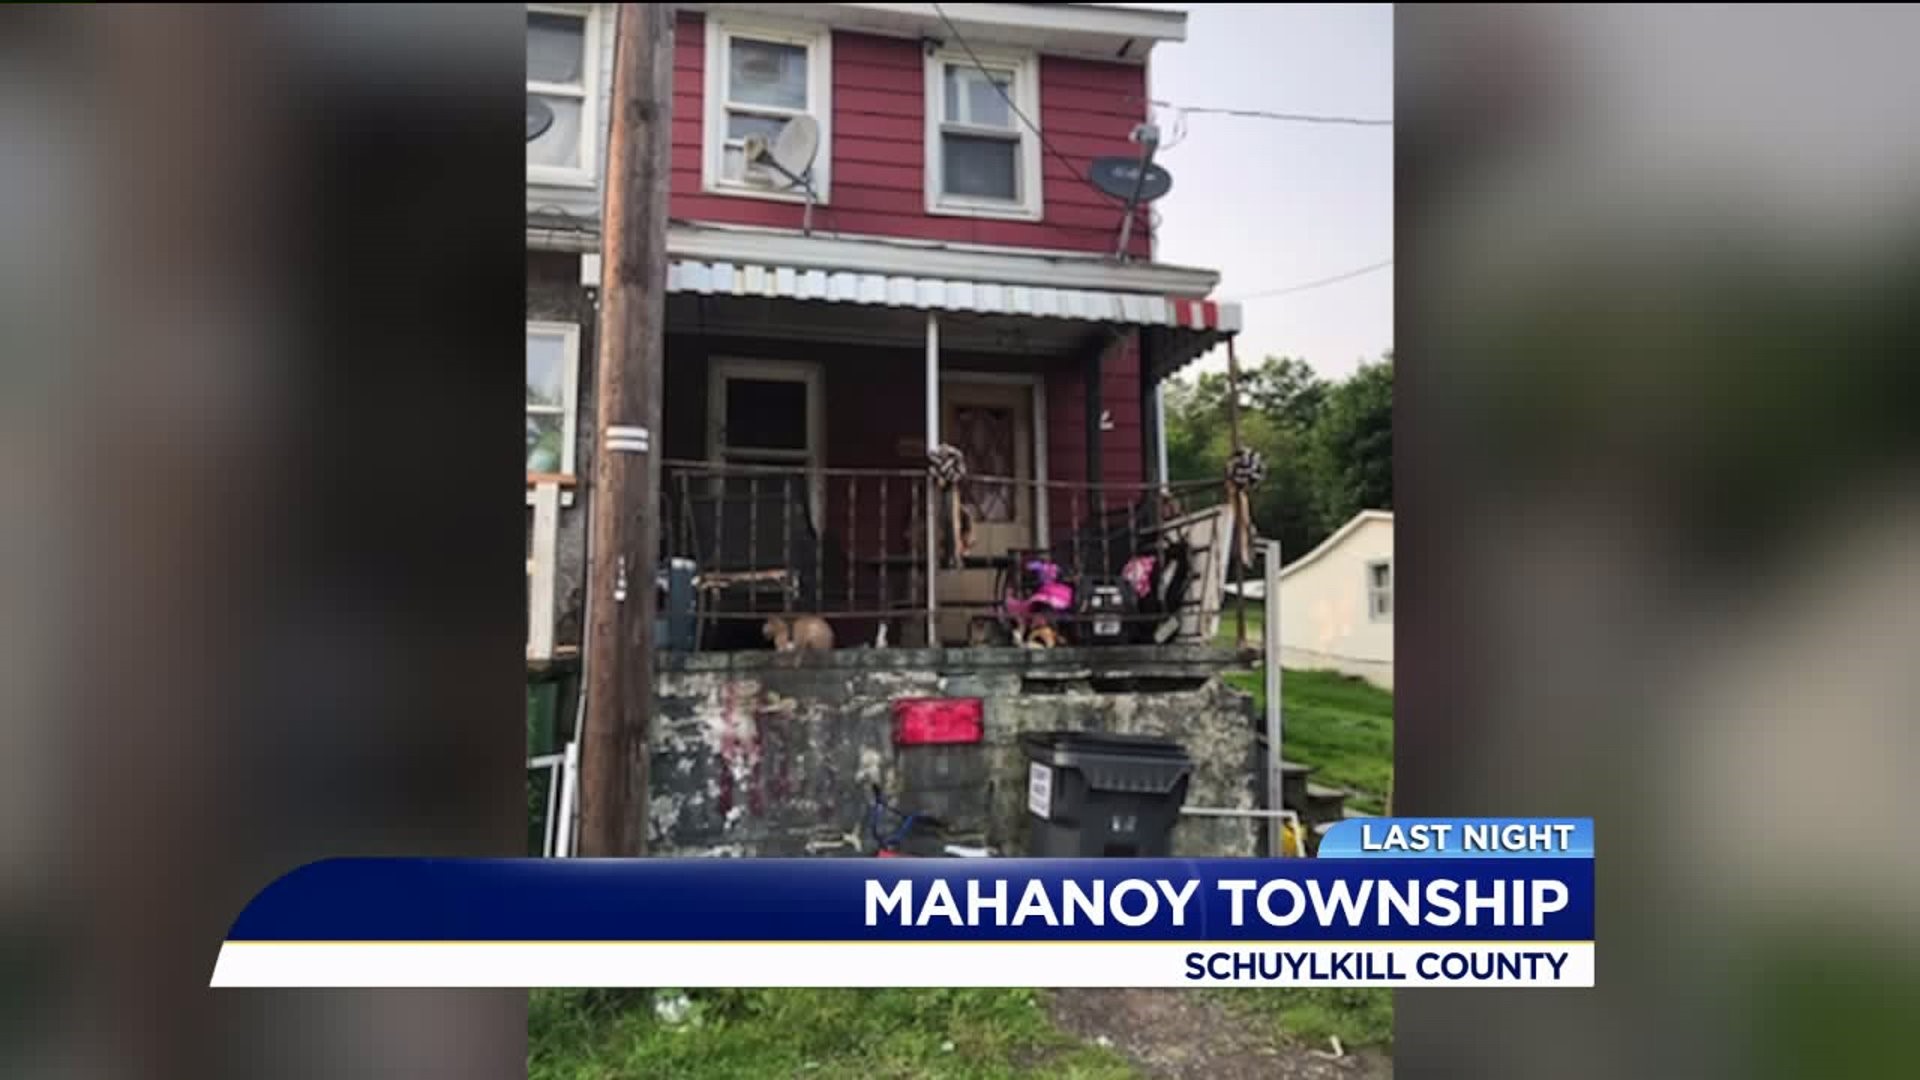 More than 20 Animals Removed from Schuylkill County Home